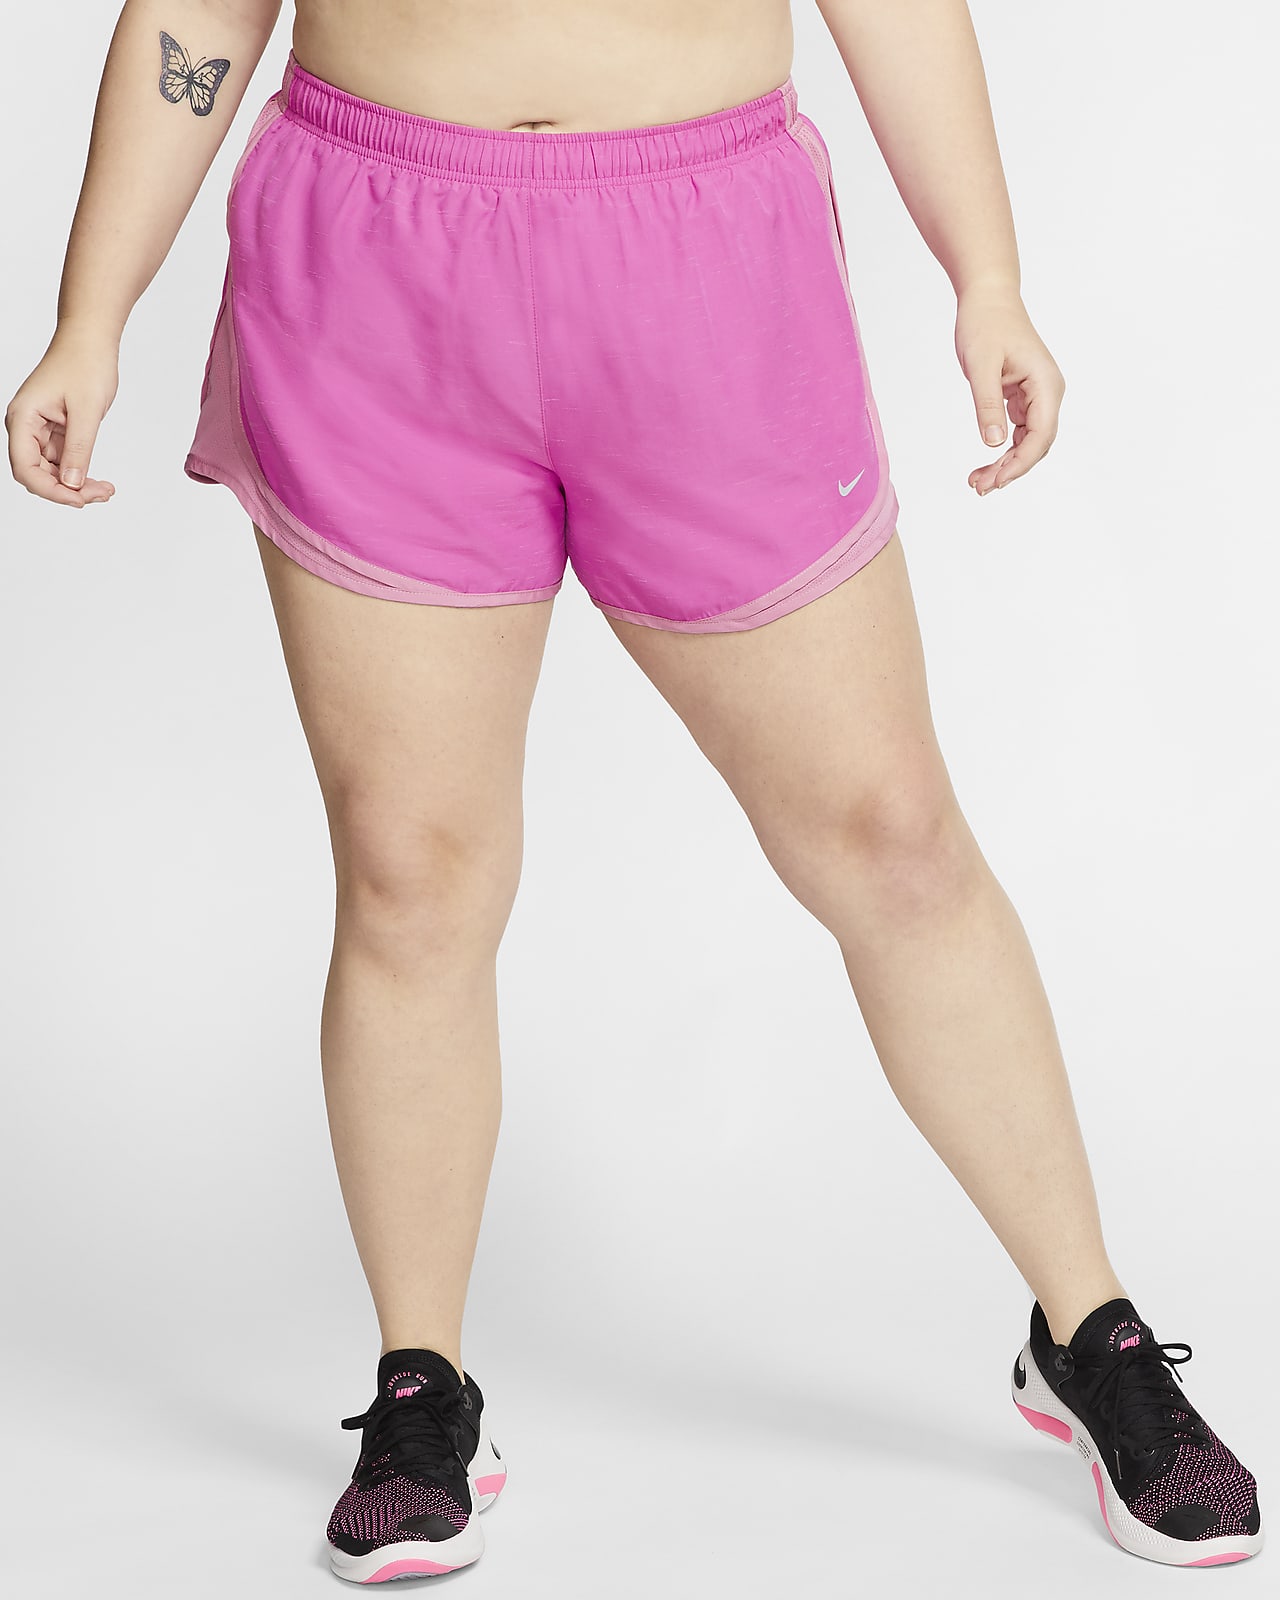 Plus Size Running Shorts That Stay Put (FINALLY)